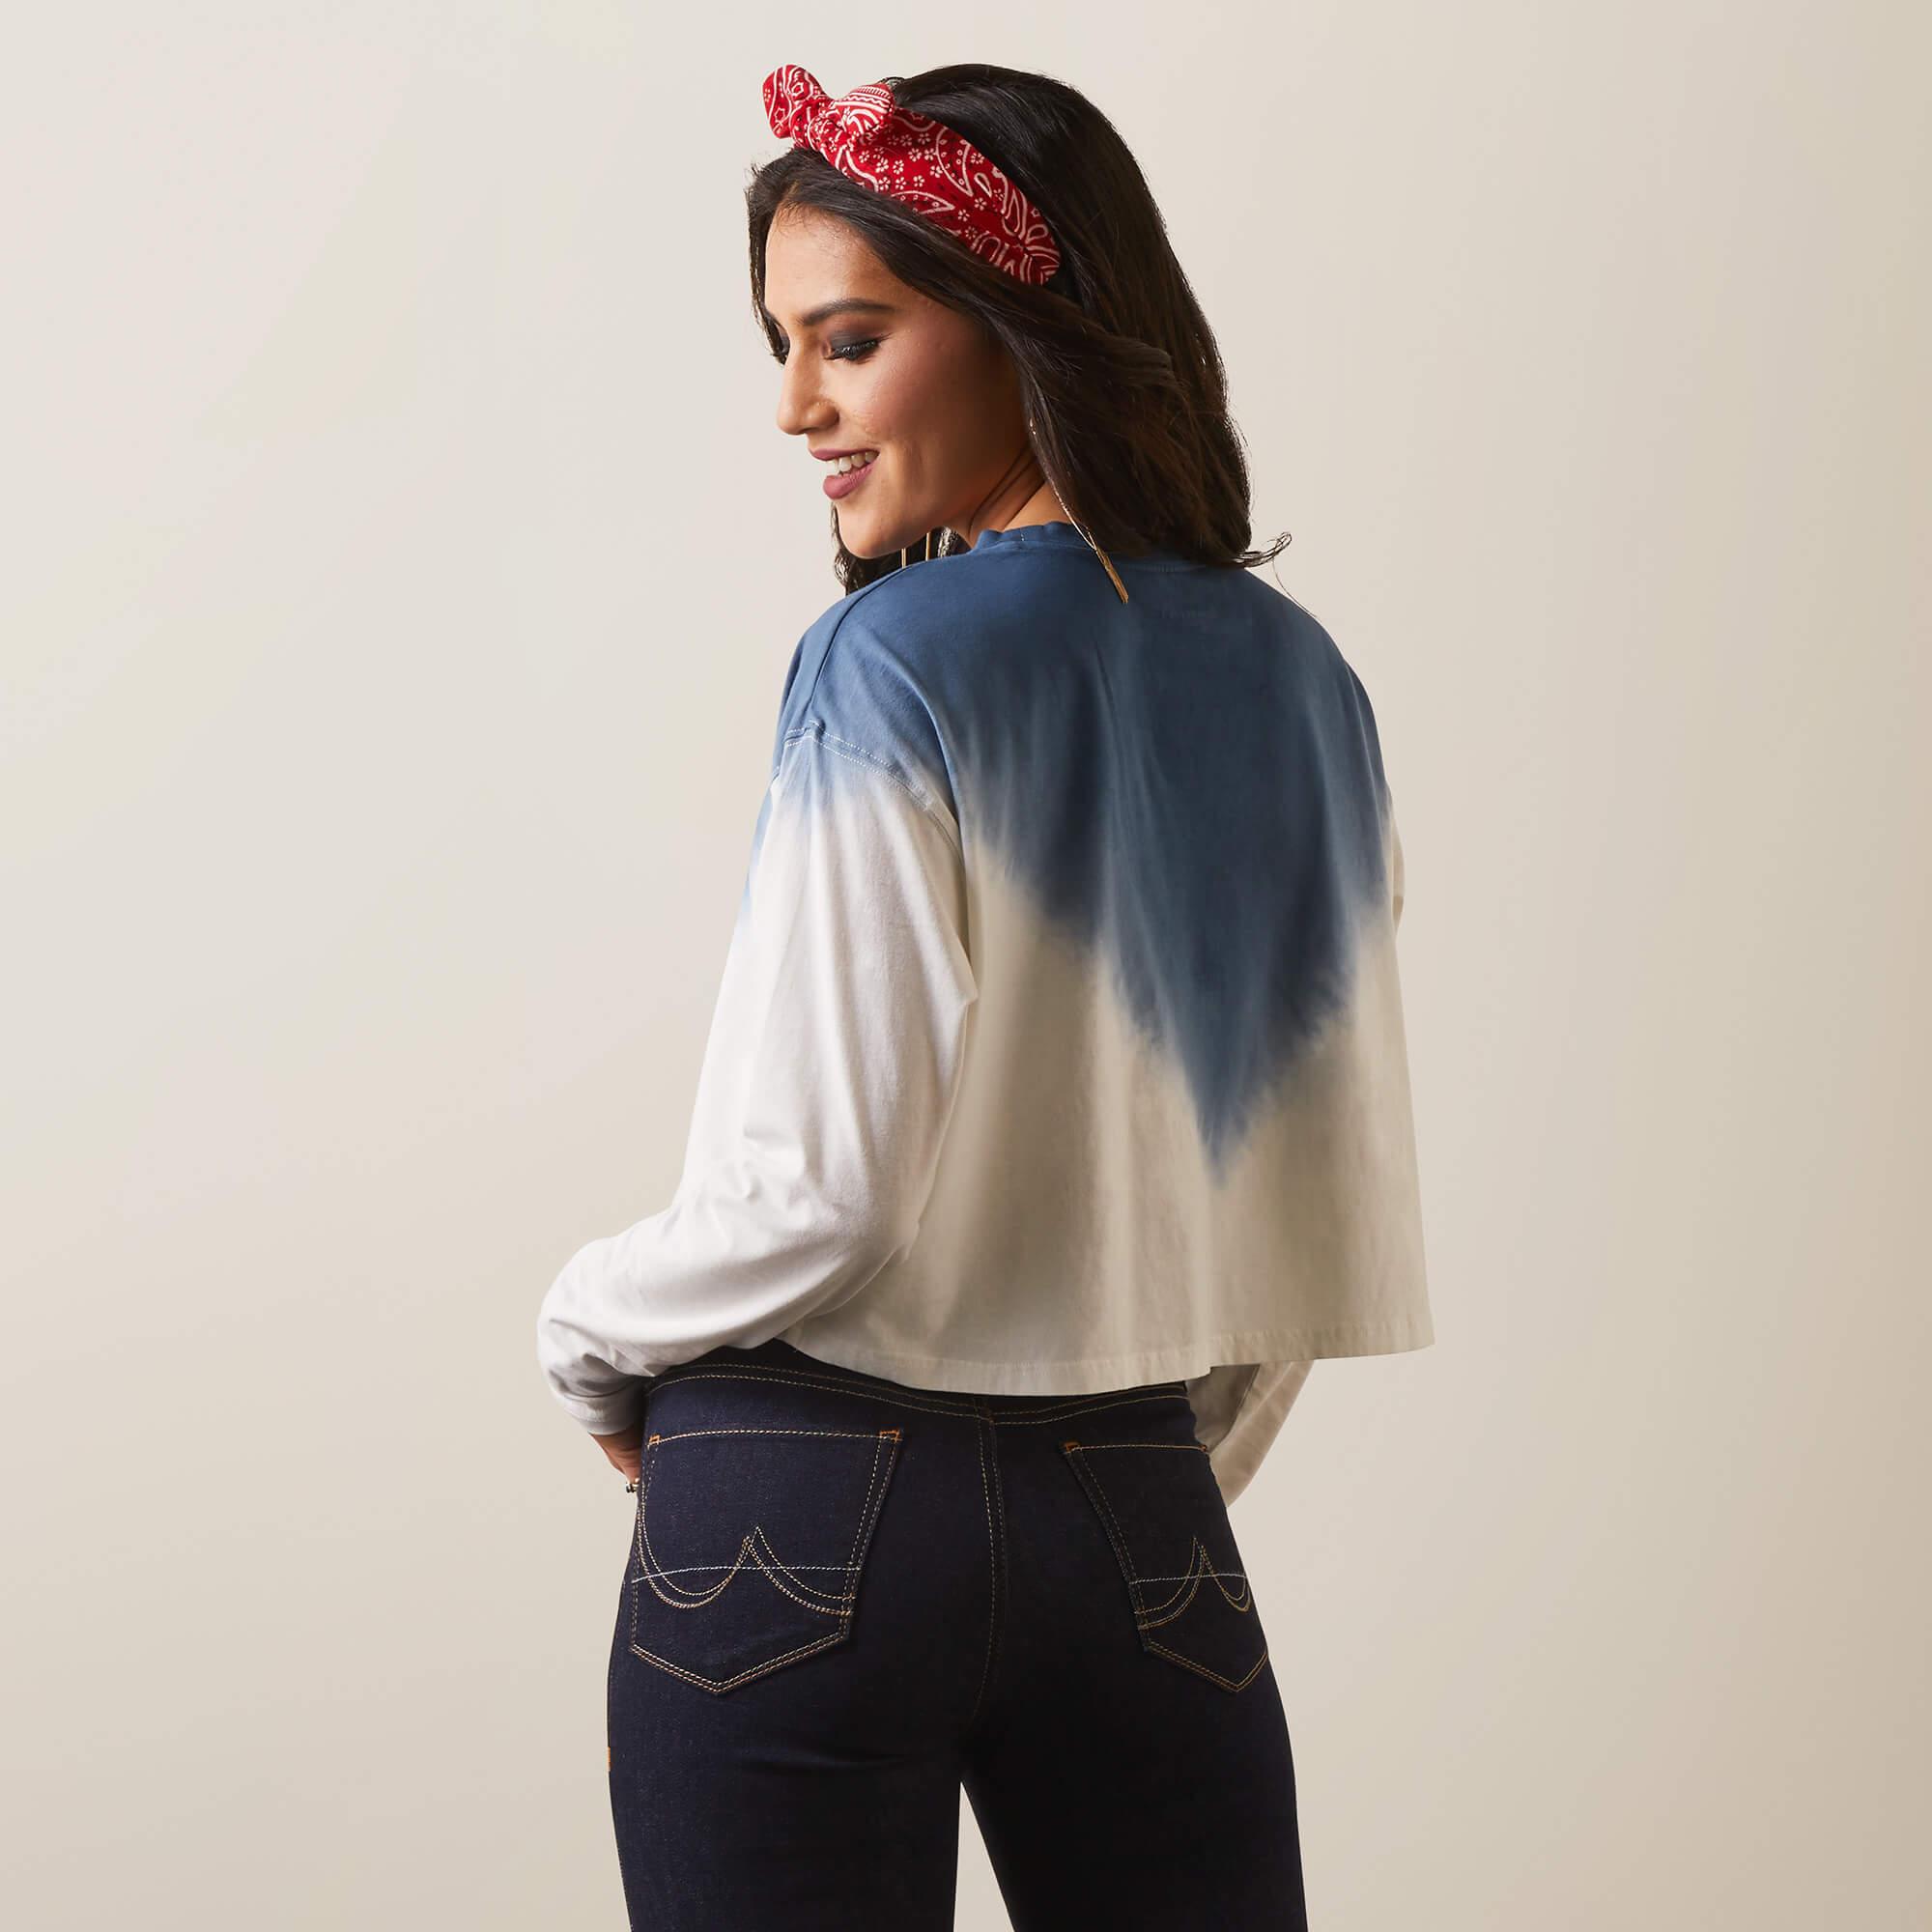 Women's Howdy Ombre Top - White - Purpose-Built / Home of the Trades